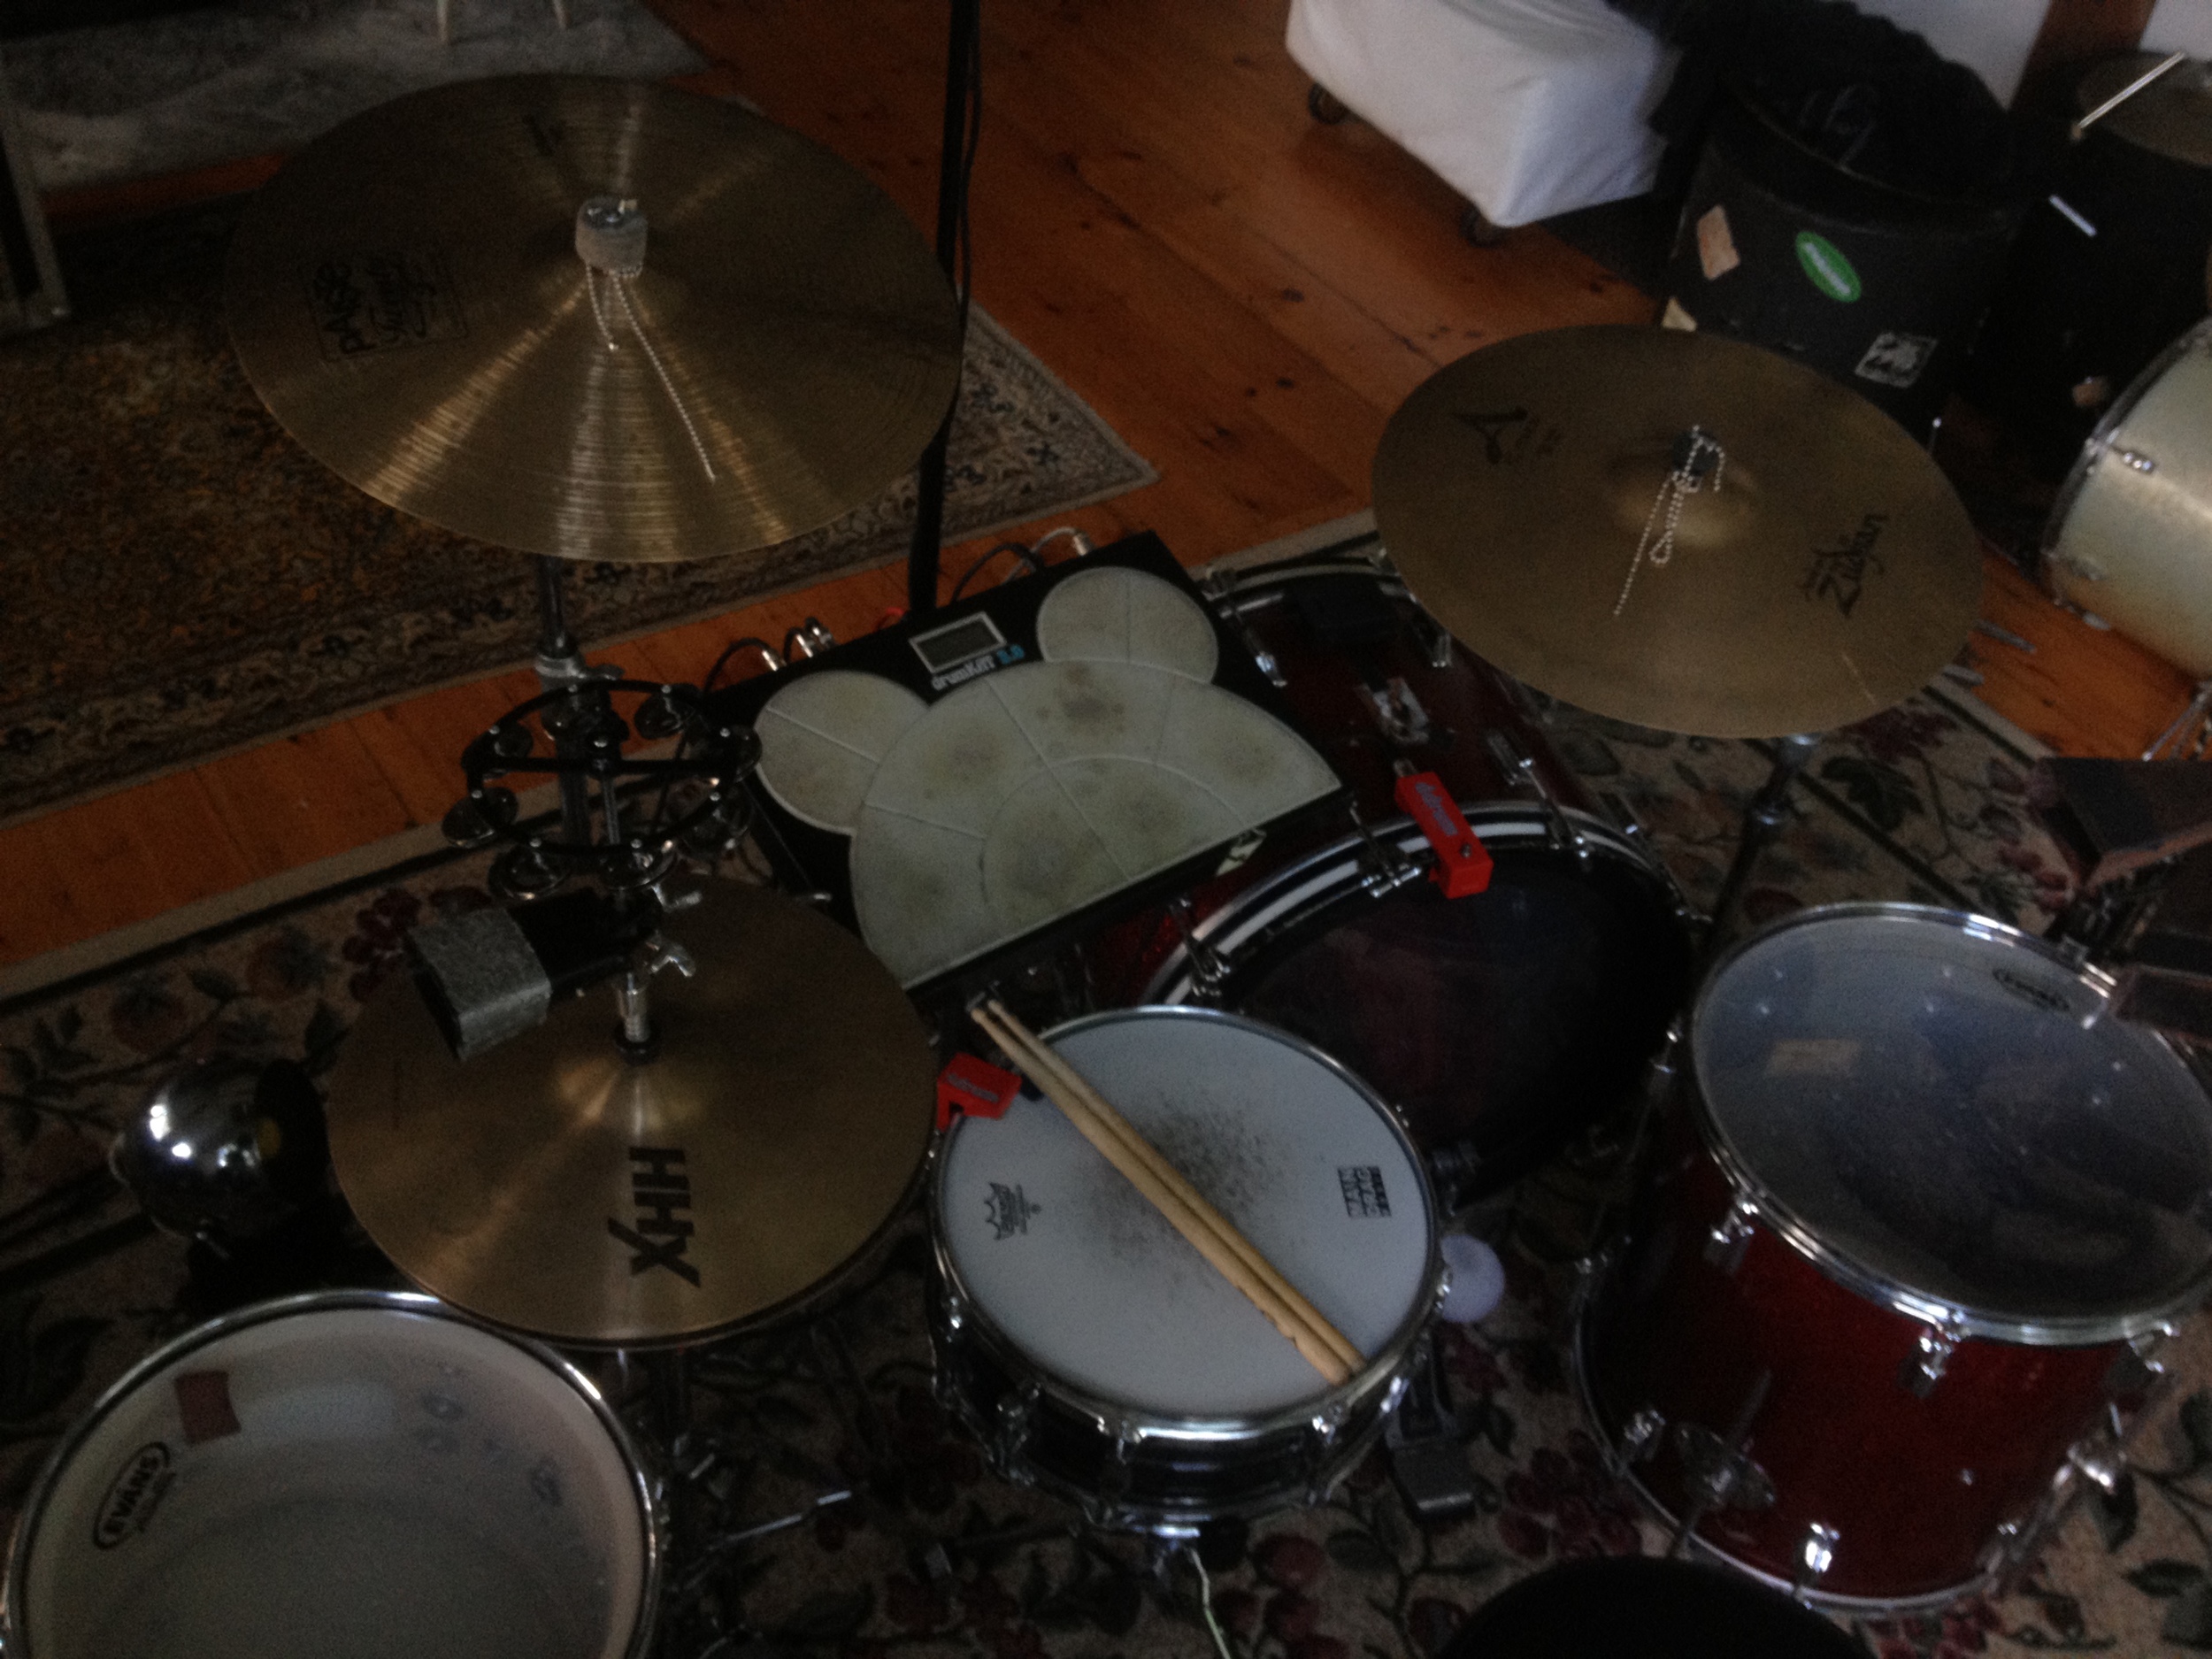 drums all triggered up!